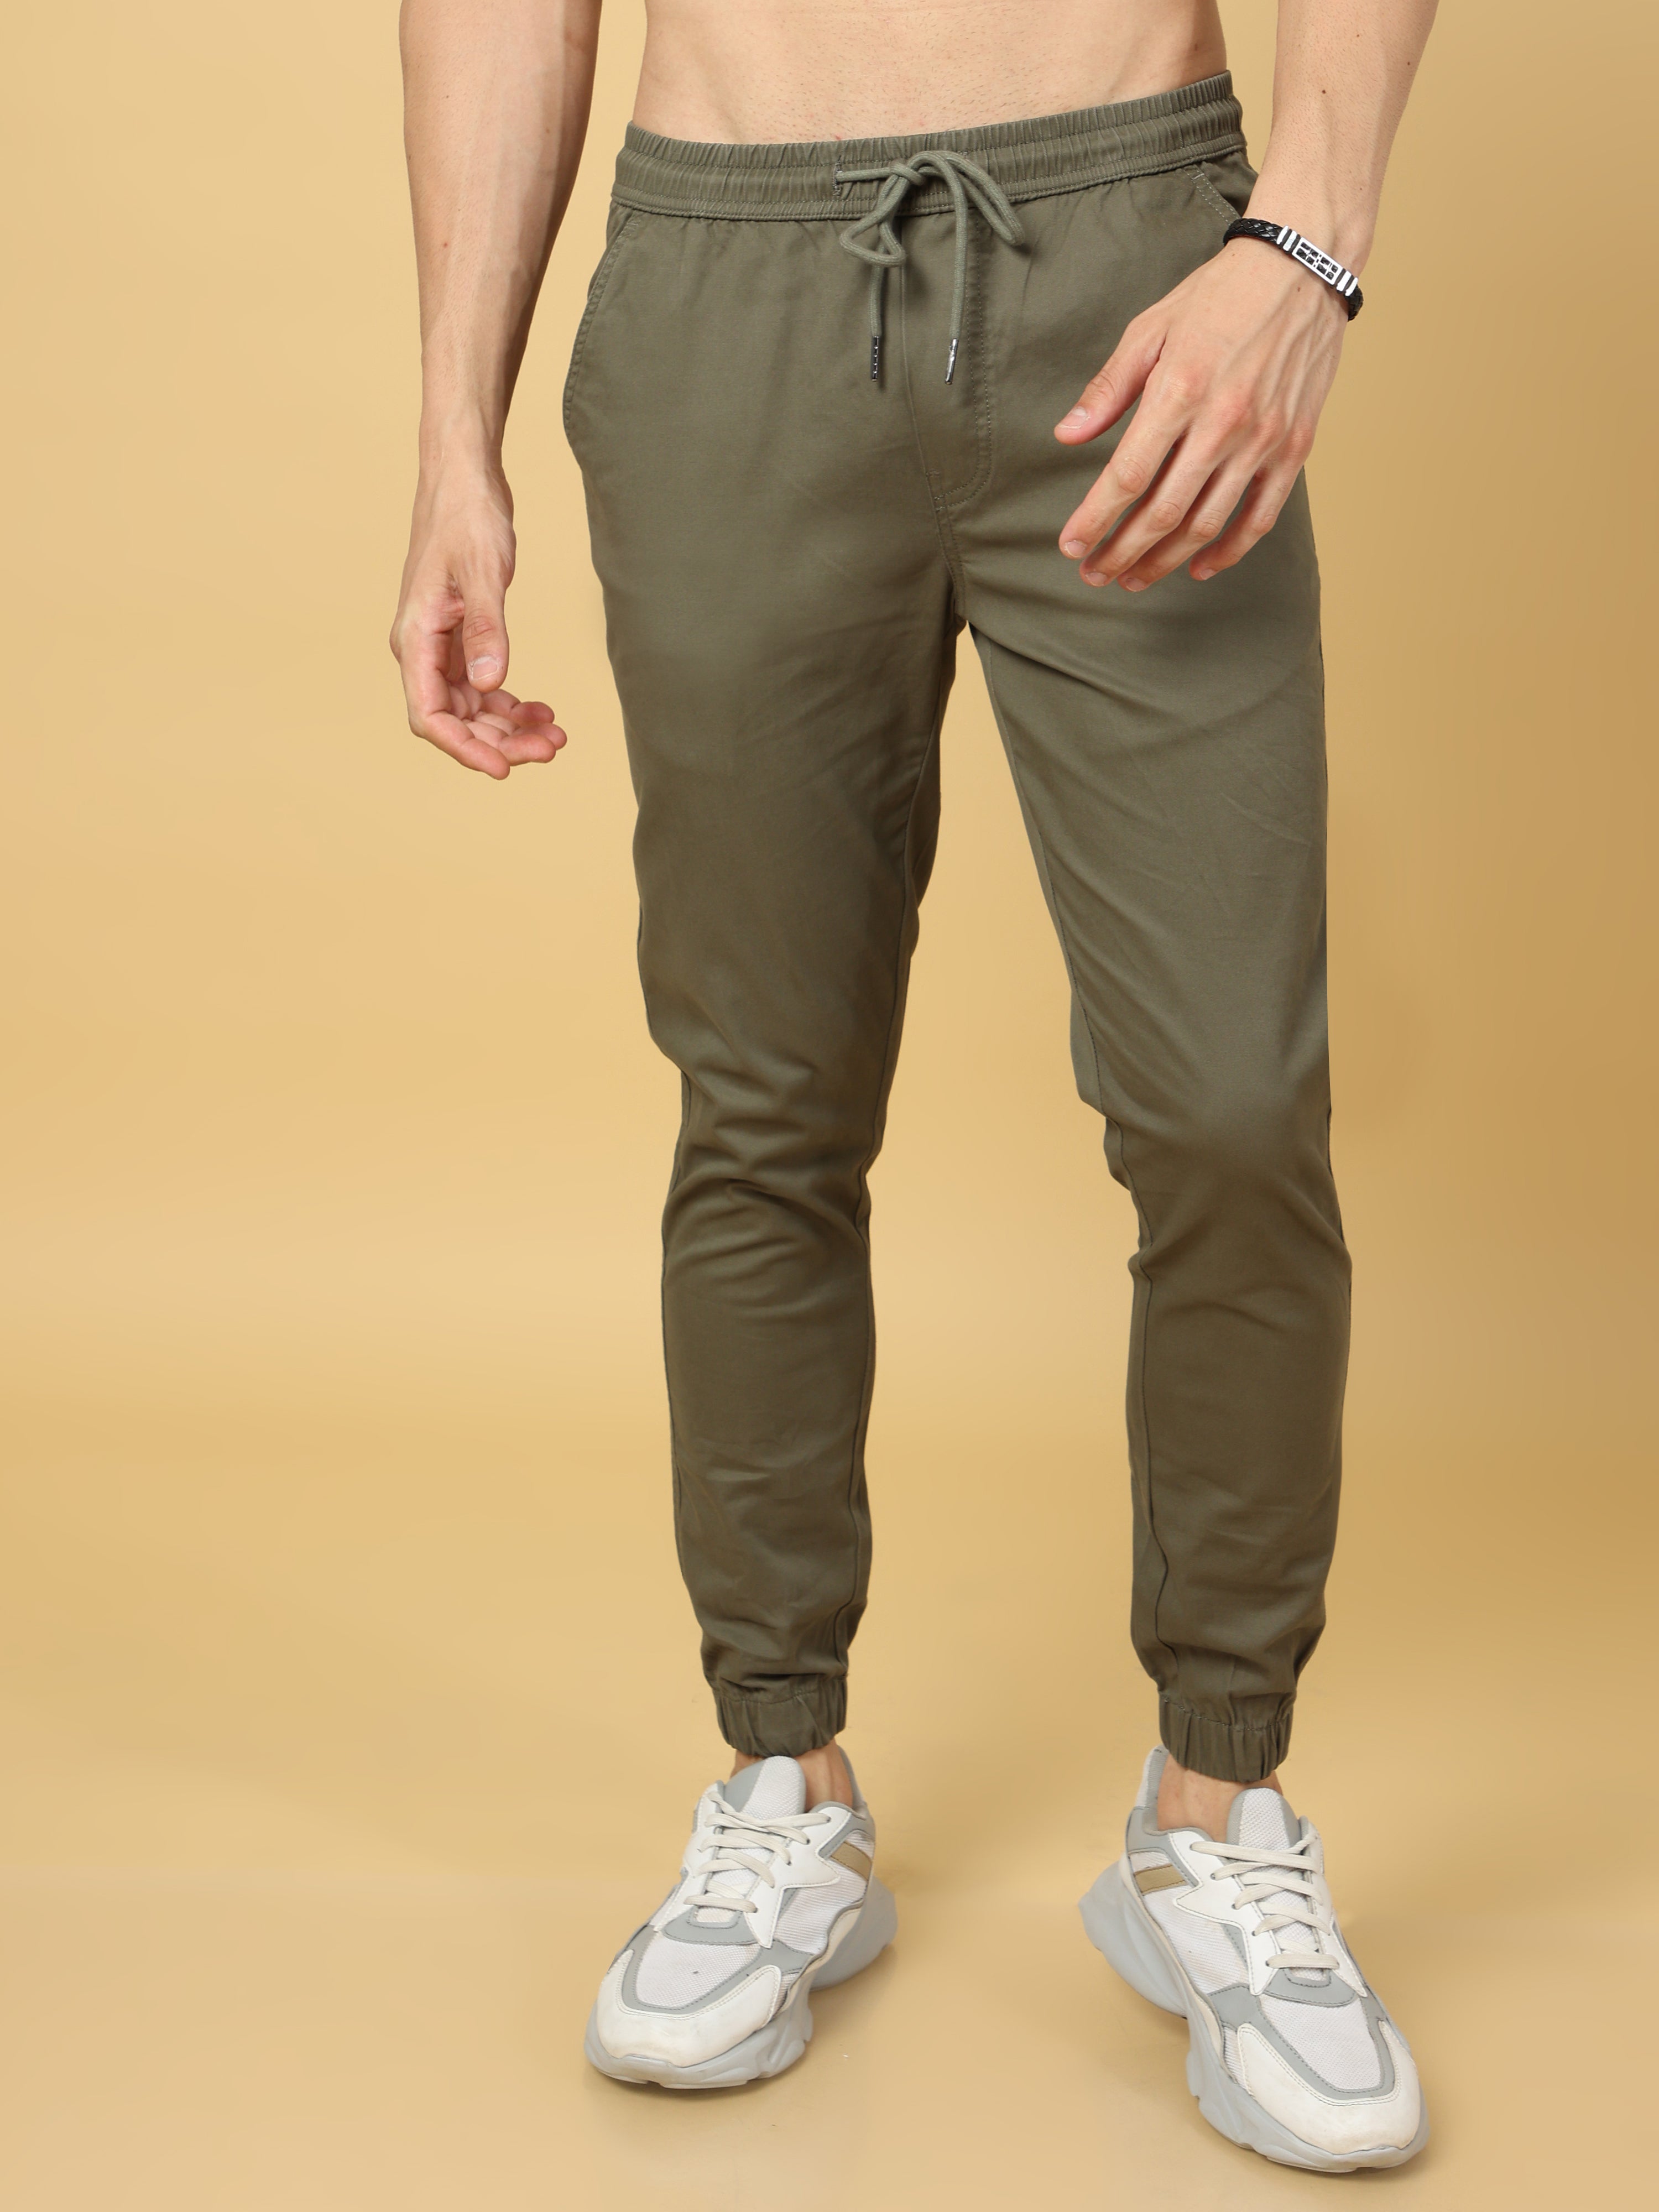 Buy Black Trousers & Pants for Men by Xewiss Online | Ajio.com